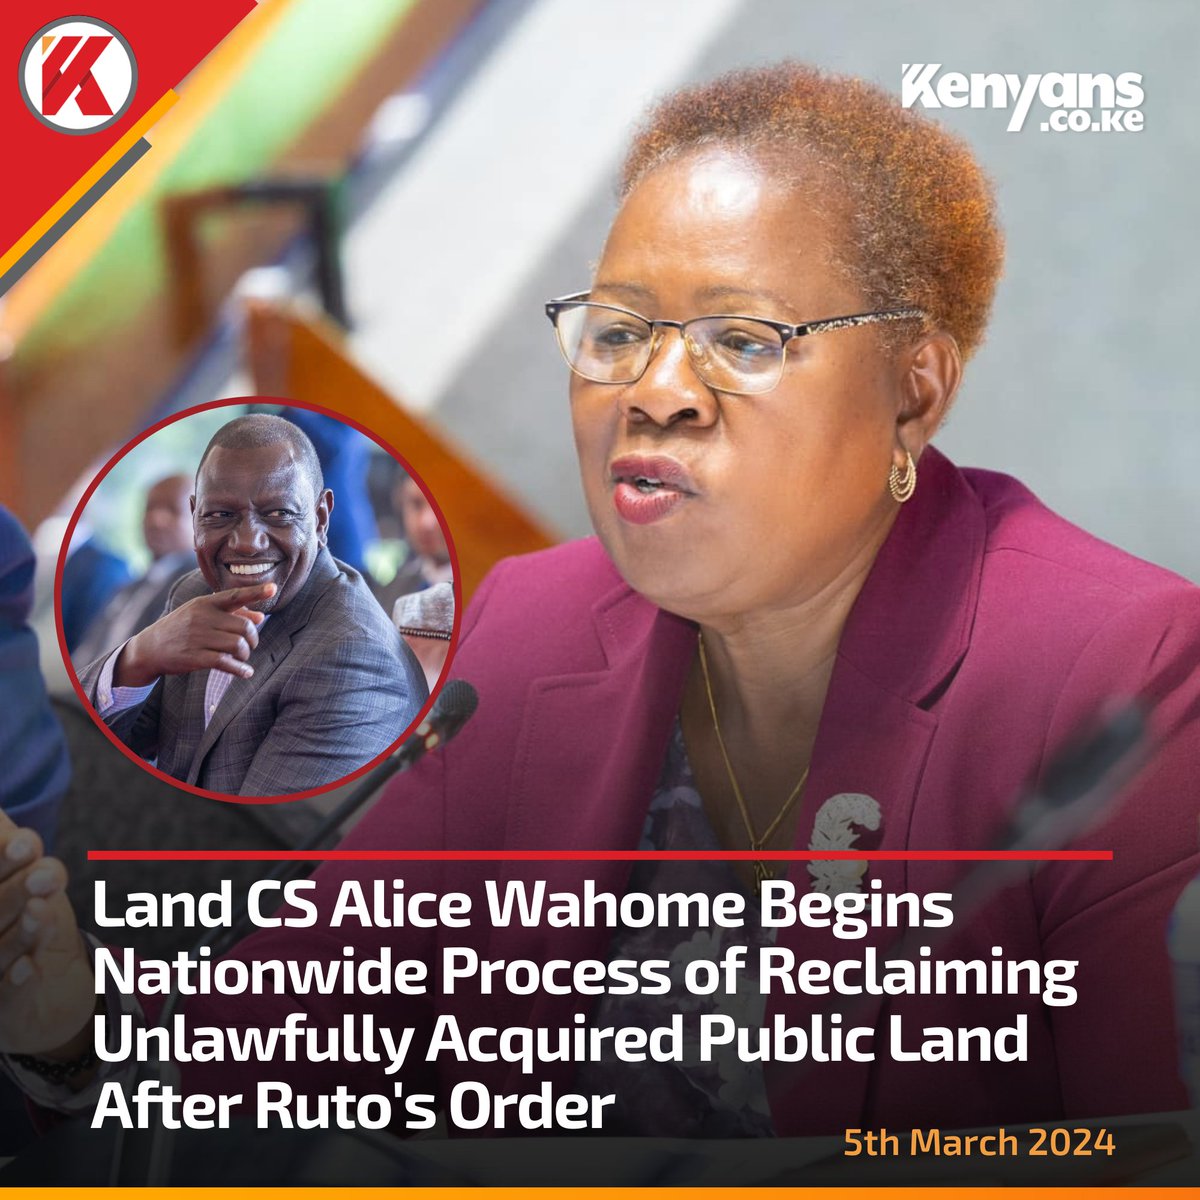 How about starting with Weston and moving onto Turbo? Then Kitale Prison, KARI, ADC etc. This move designed to target opposition land grabbers and to protect the well connected. Prove me wrong.